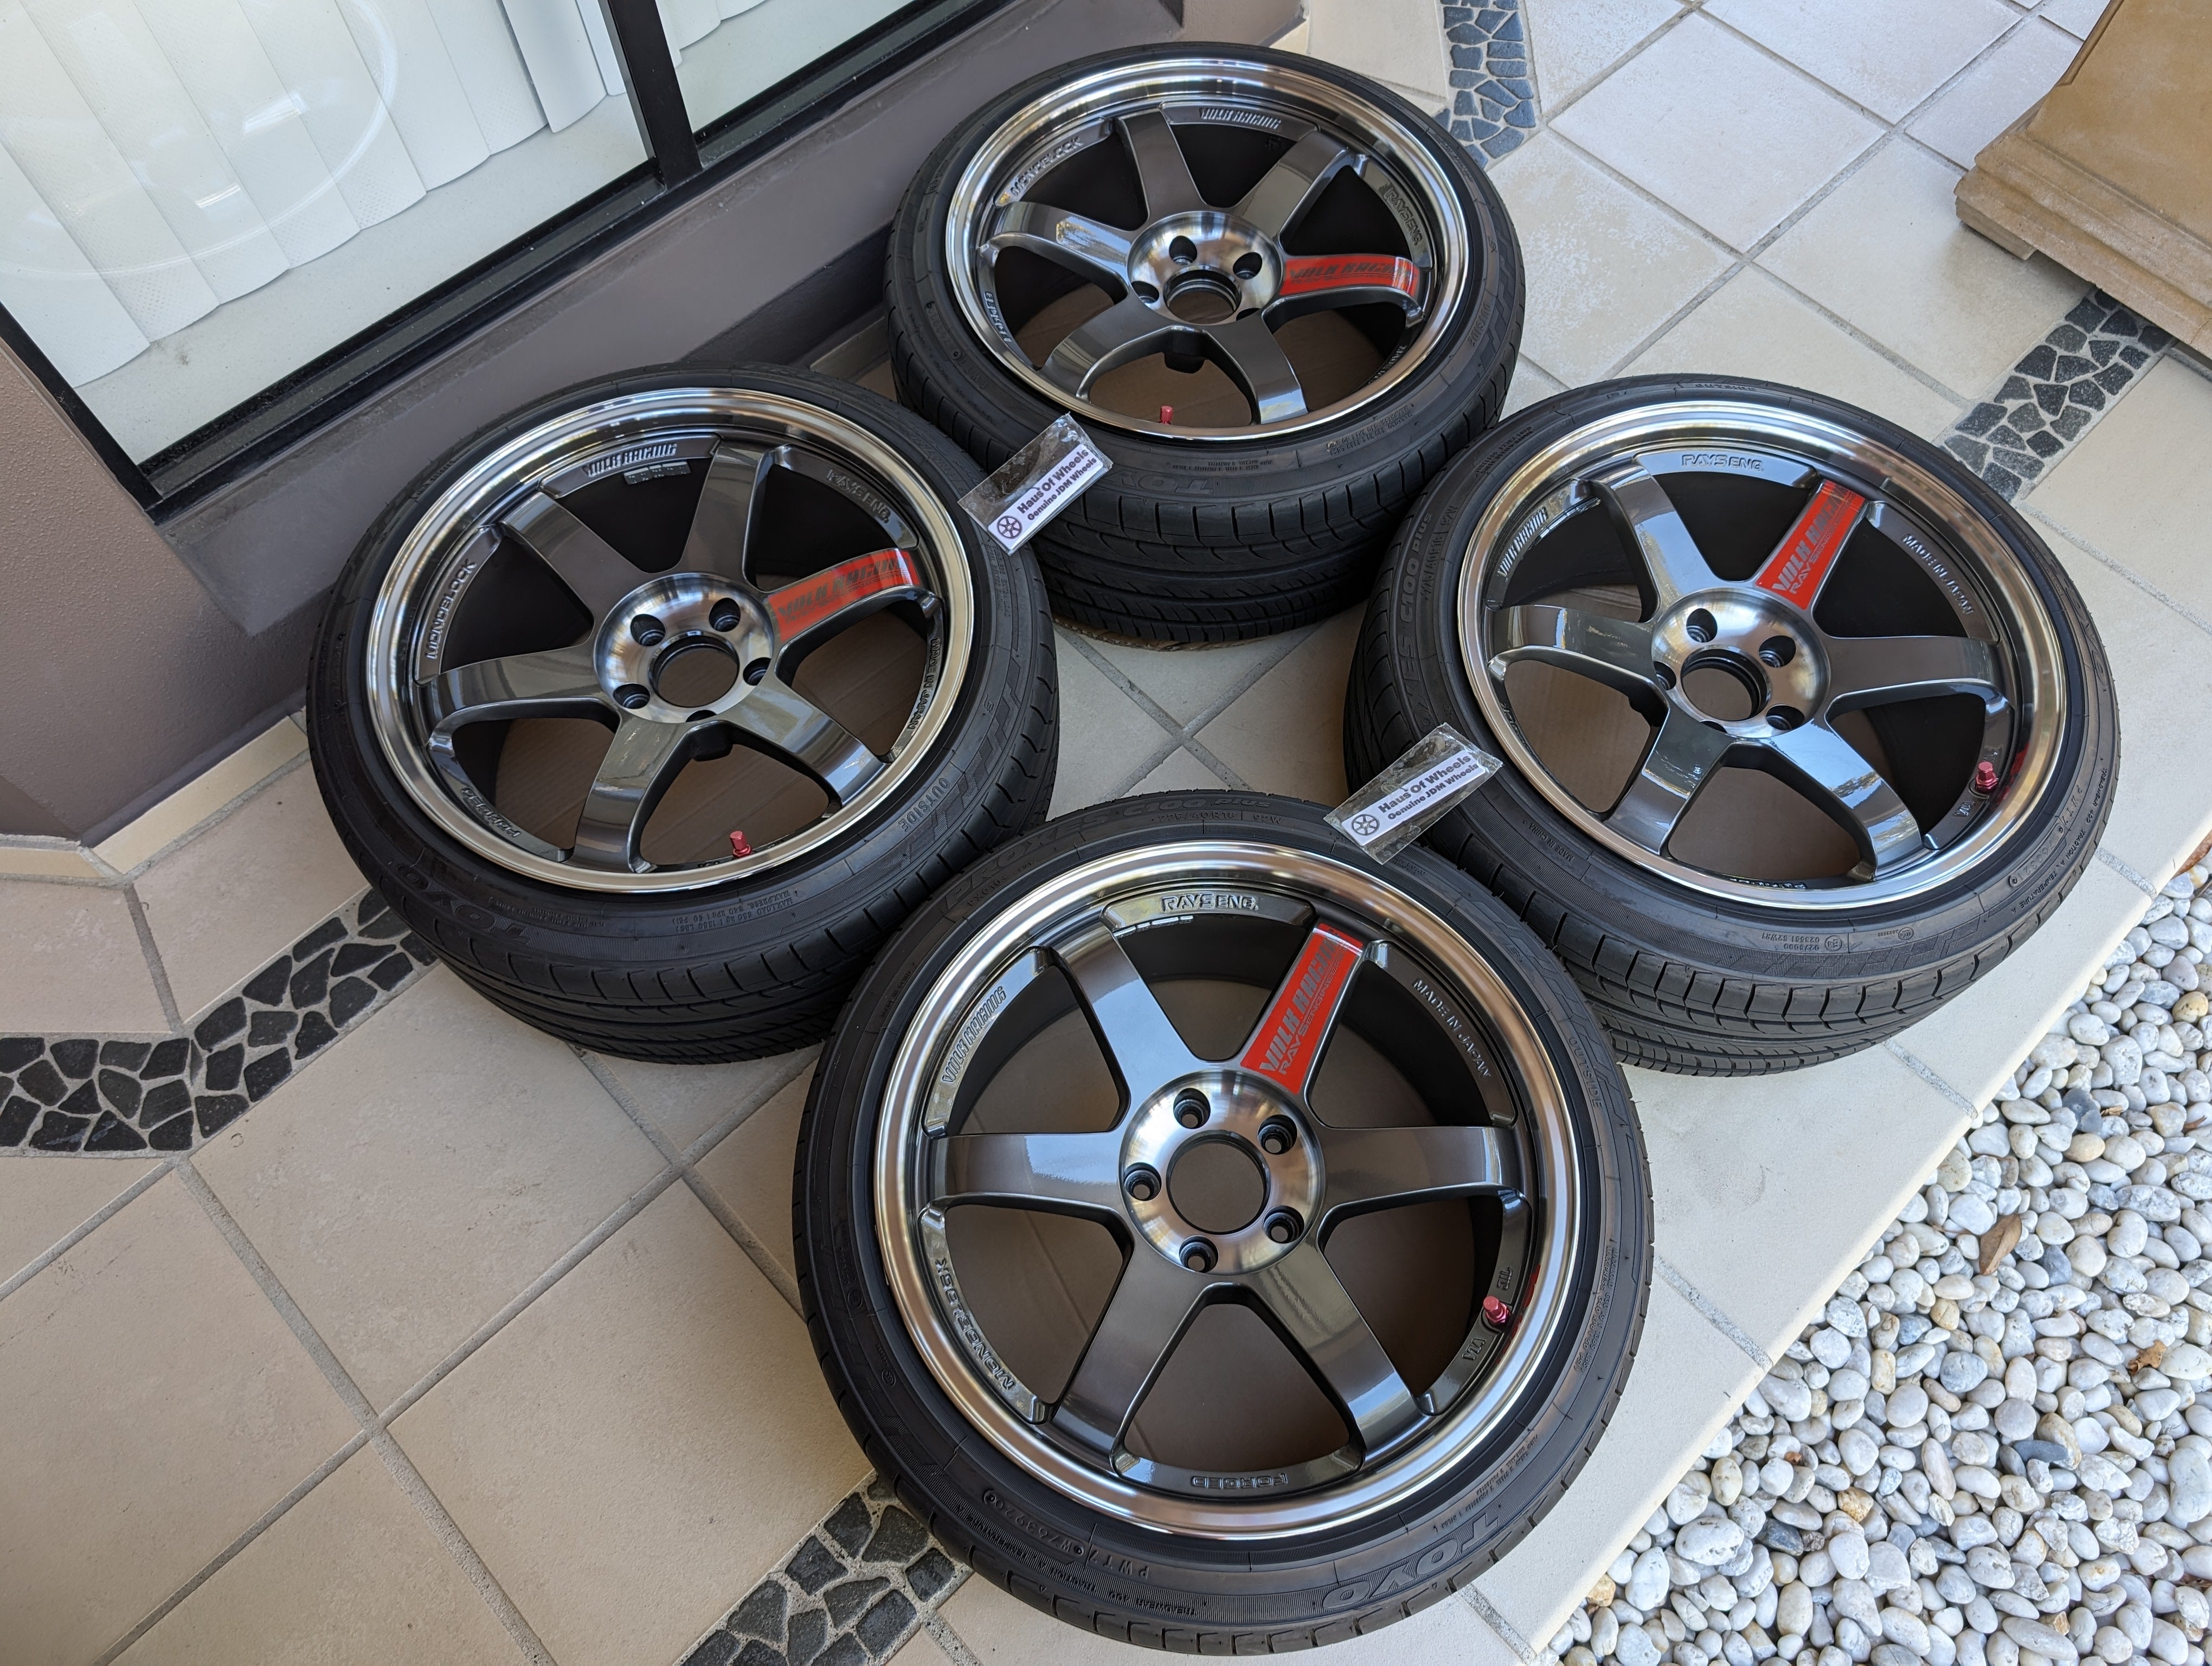 Rays Engineering Volks Racing TE37SL (Pressed Graphite) with Genuine Volk Racing Stickers and Tyres - 5x114.3 - 18x9.5 +22 (225/40/18)